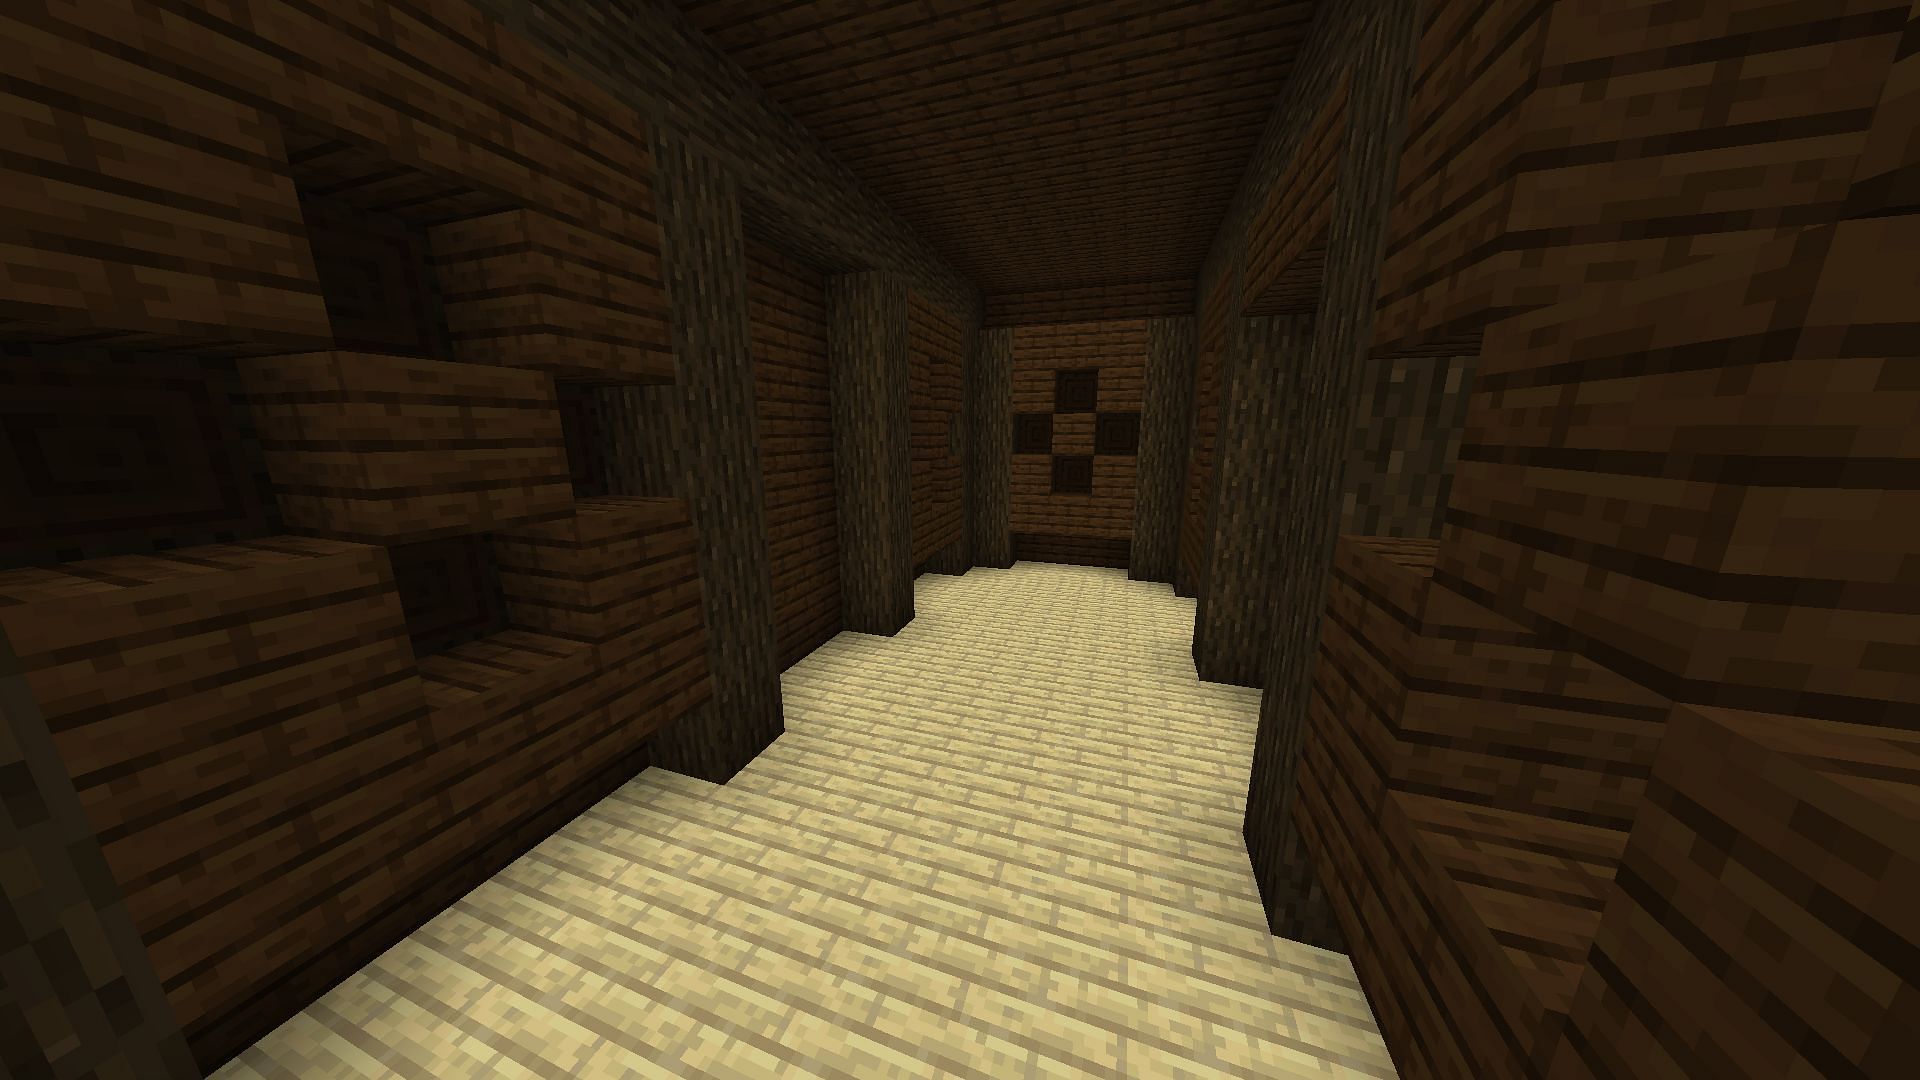 Secret rooms in the Minecraft structure without any openings or doors (Image via Mojang)